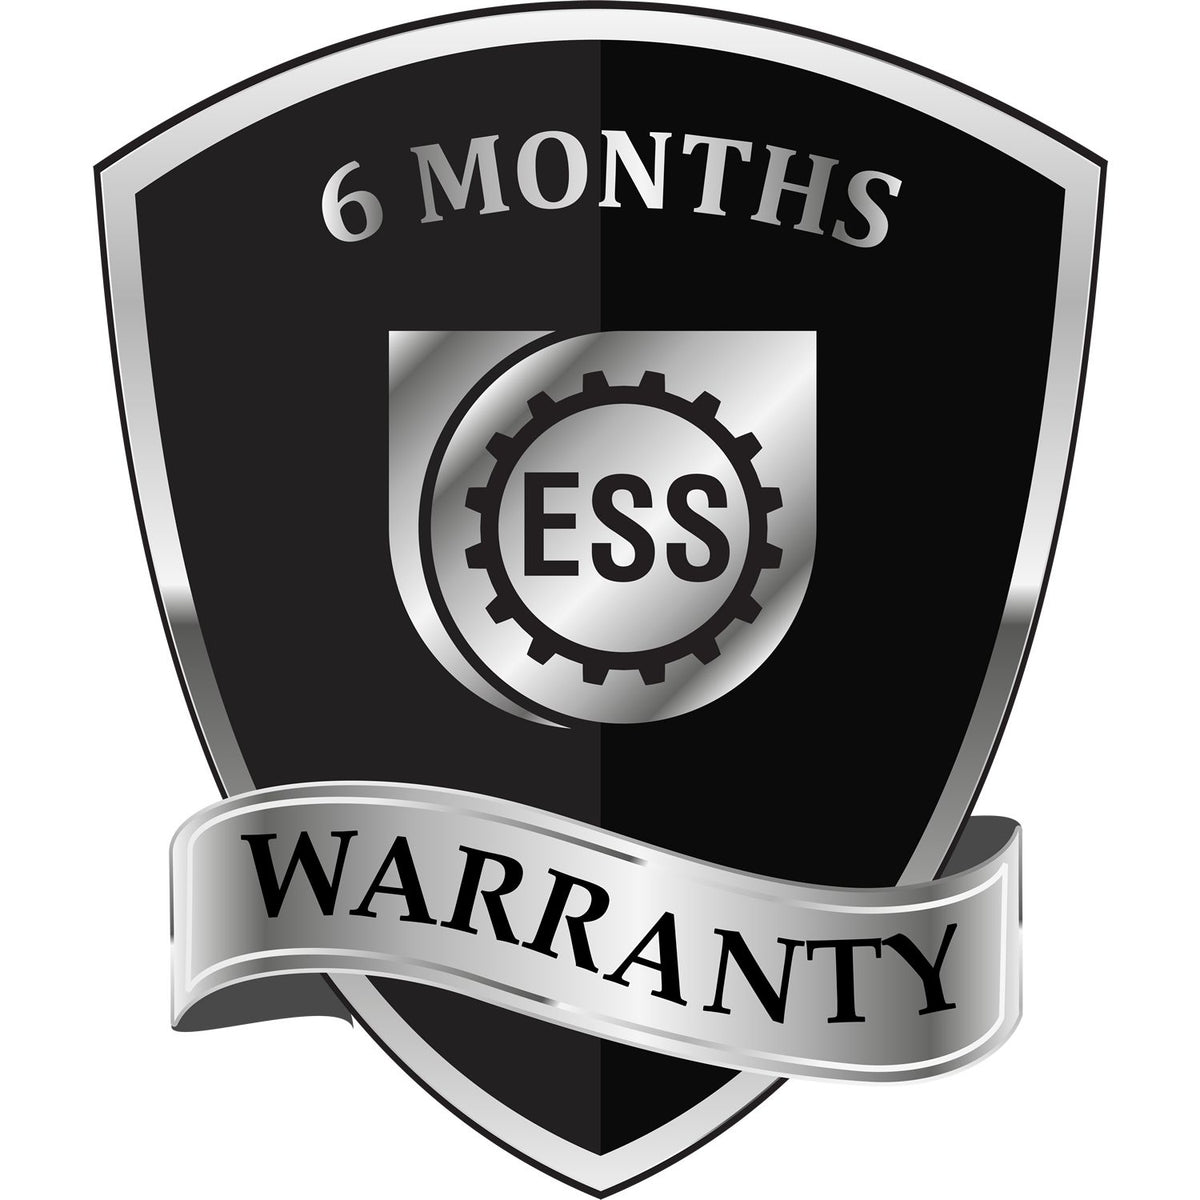 A badge or emblem showing a warranty icon for the PSI Utah Notary Stamp